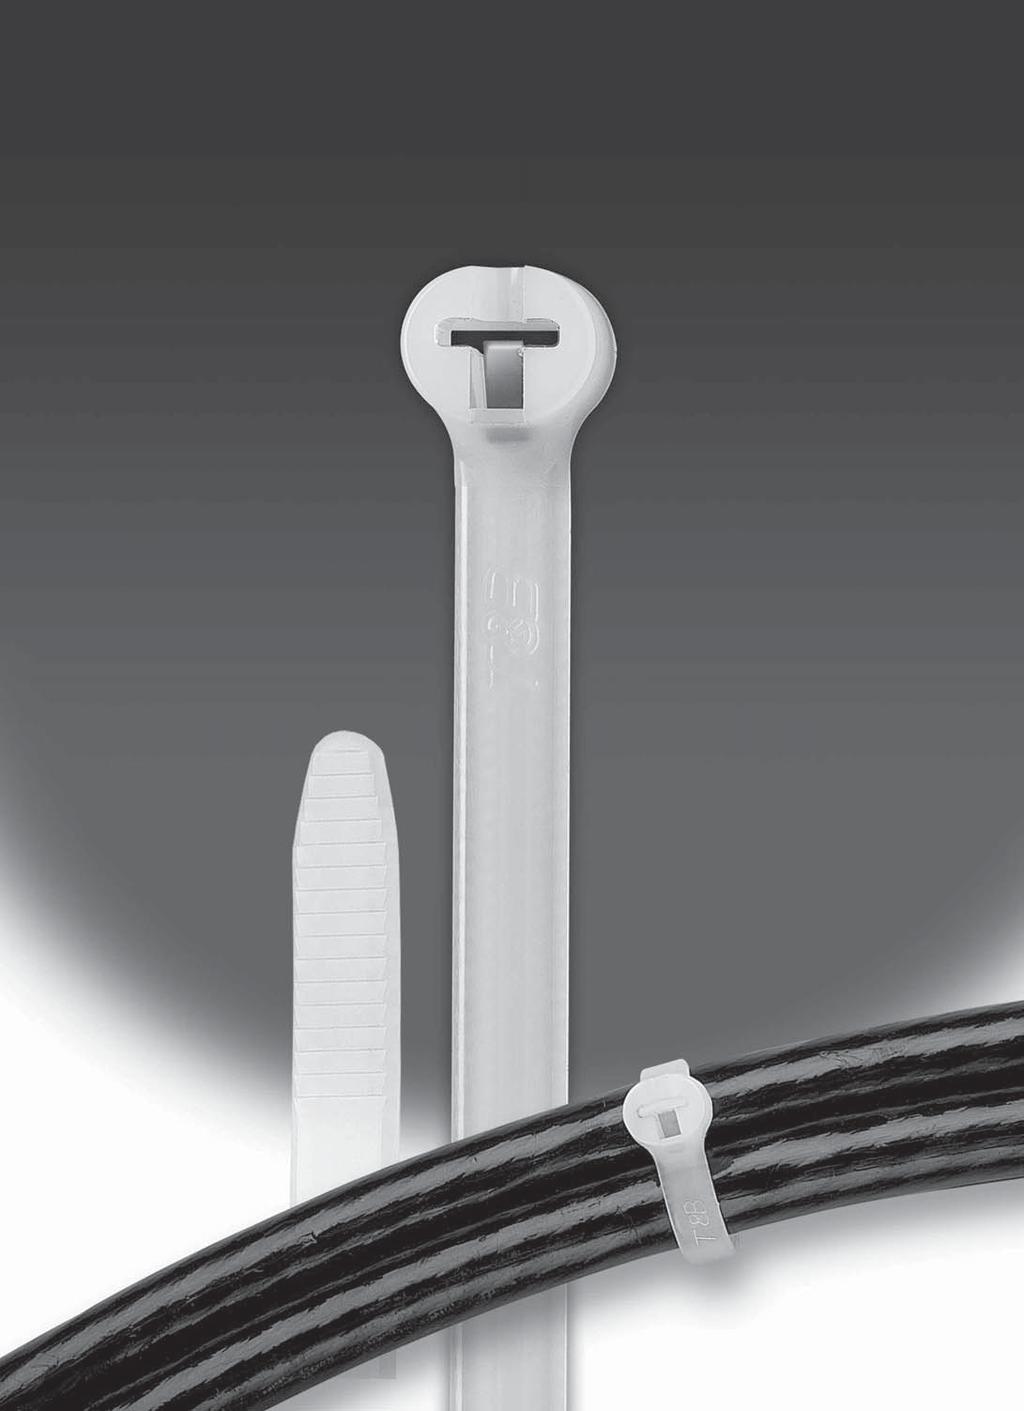 Ty-Rap Cable Fastening Systems Why Choose Genuine Ty-Rap Cable Ties? Rounded, Low Profile Head gives a professional, quality look to wire bundling projects.